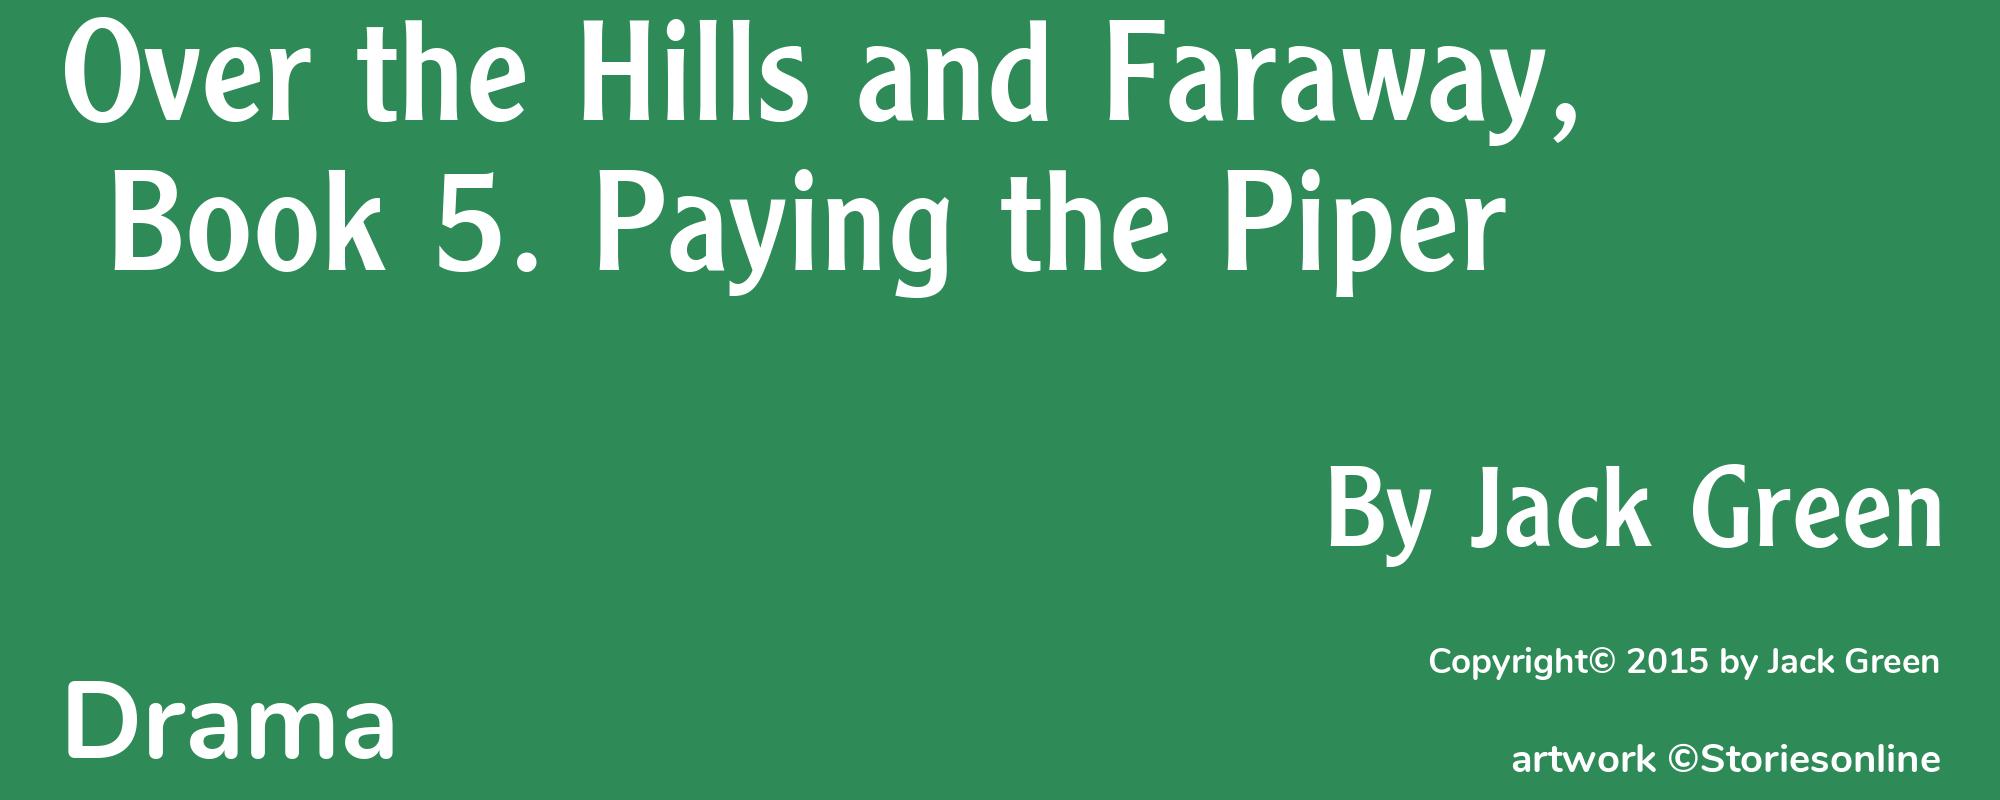 Over the Hills and Faraway, Book 5. Paying the Piper - Cover